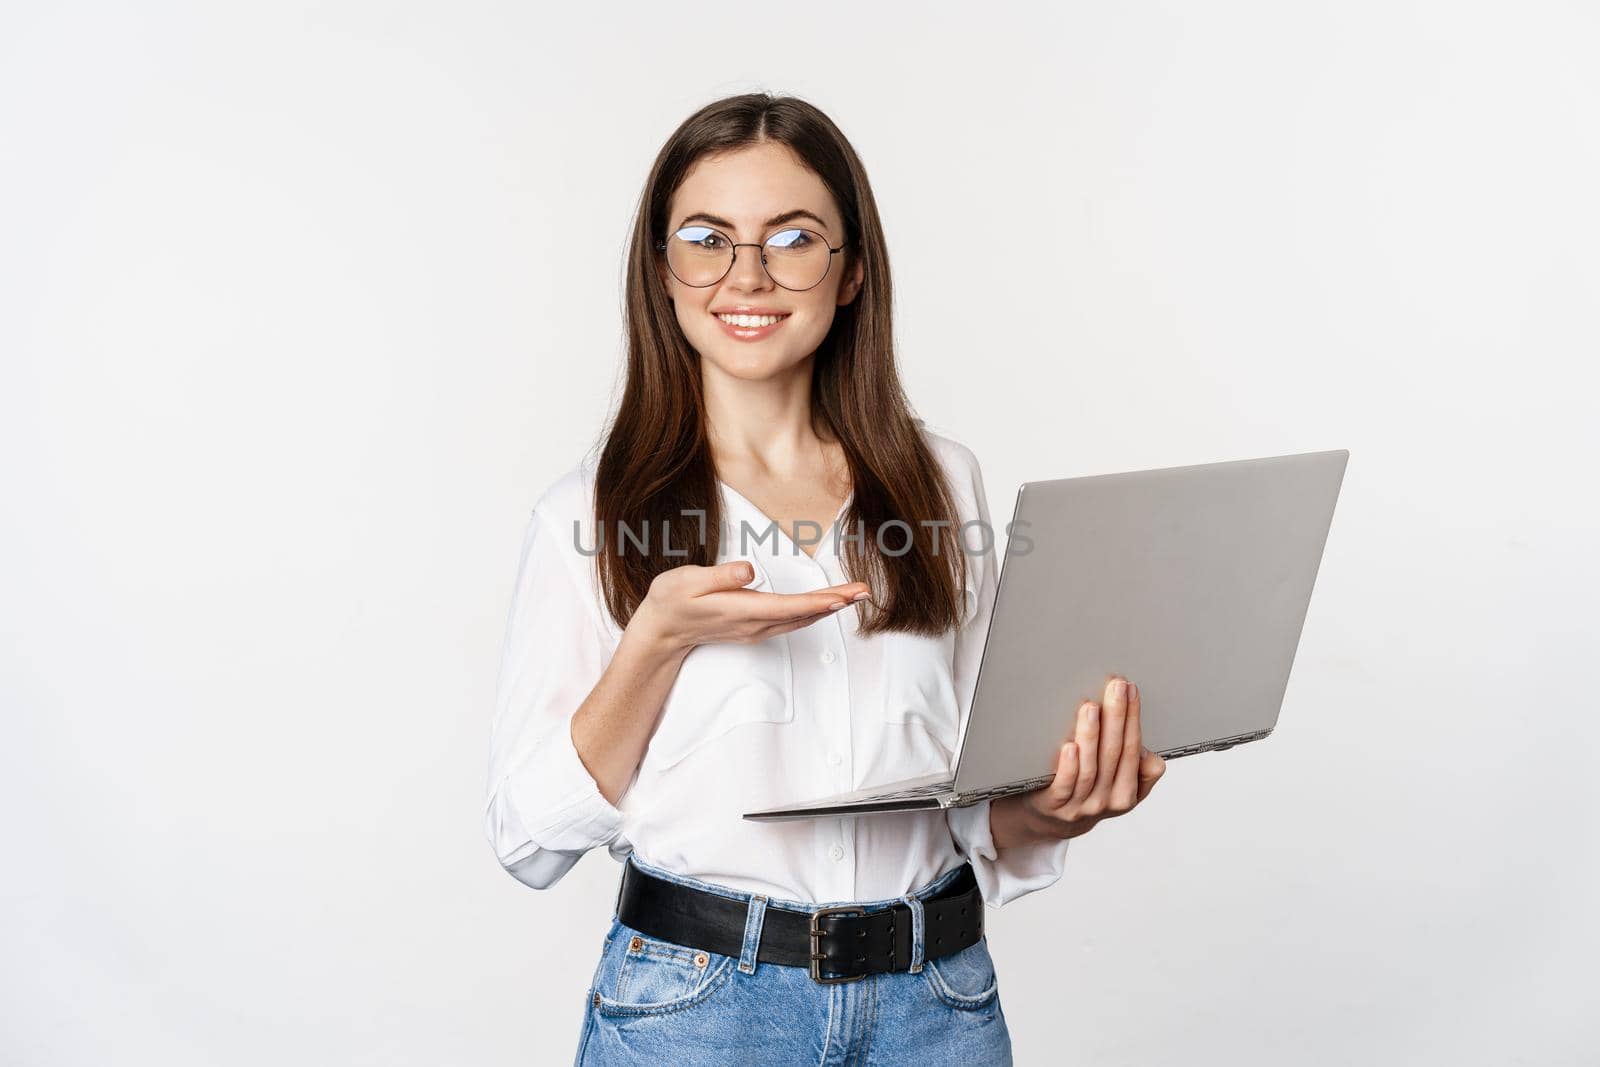 Portrait of woman in glasses holding laptop, pointing at screen, showing her work on computer, standing over white background.